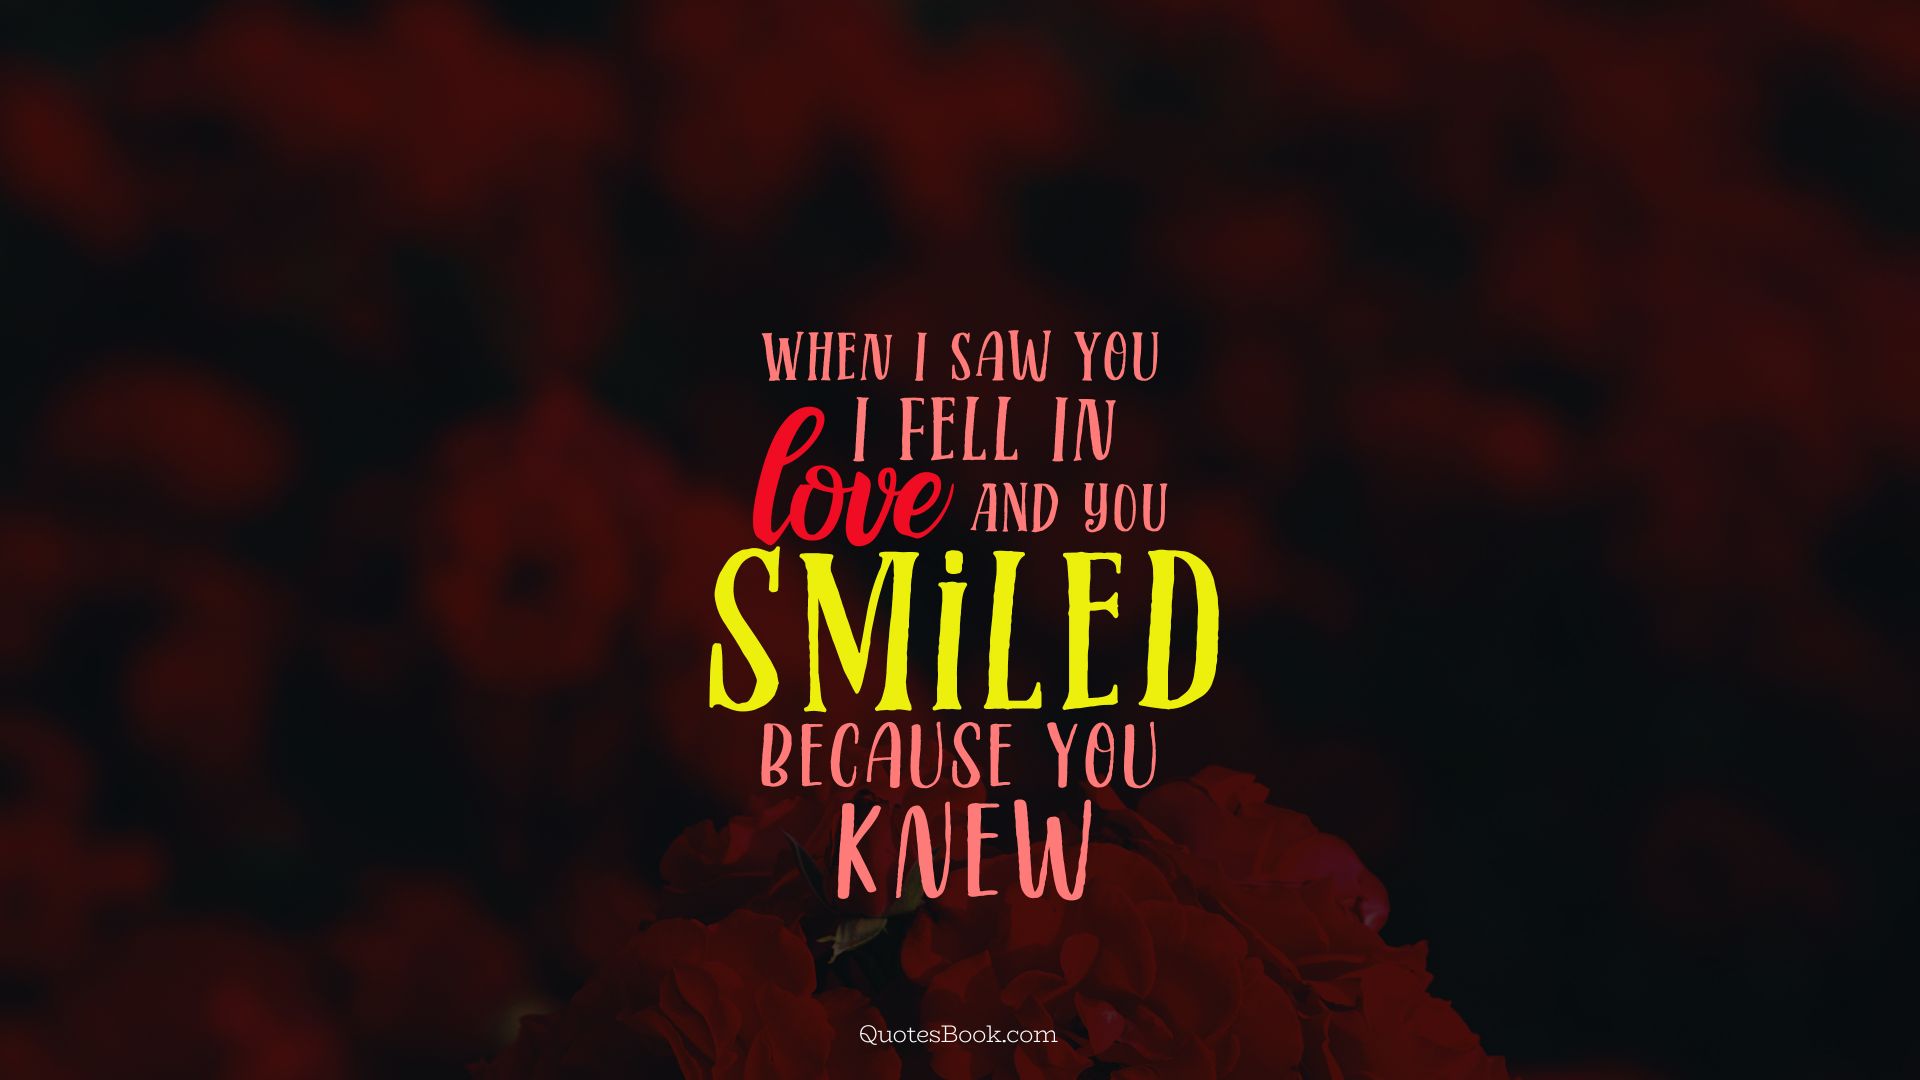 When i saw you i fell in love and you smiled because you knew 